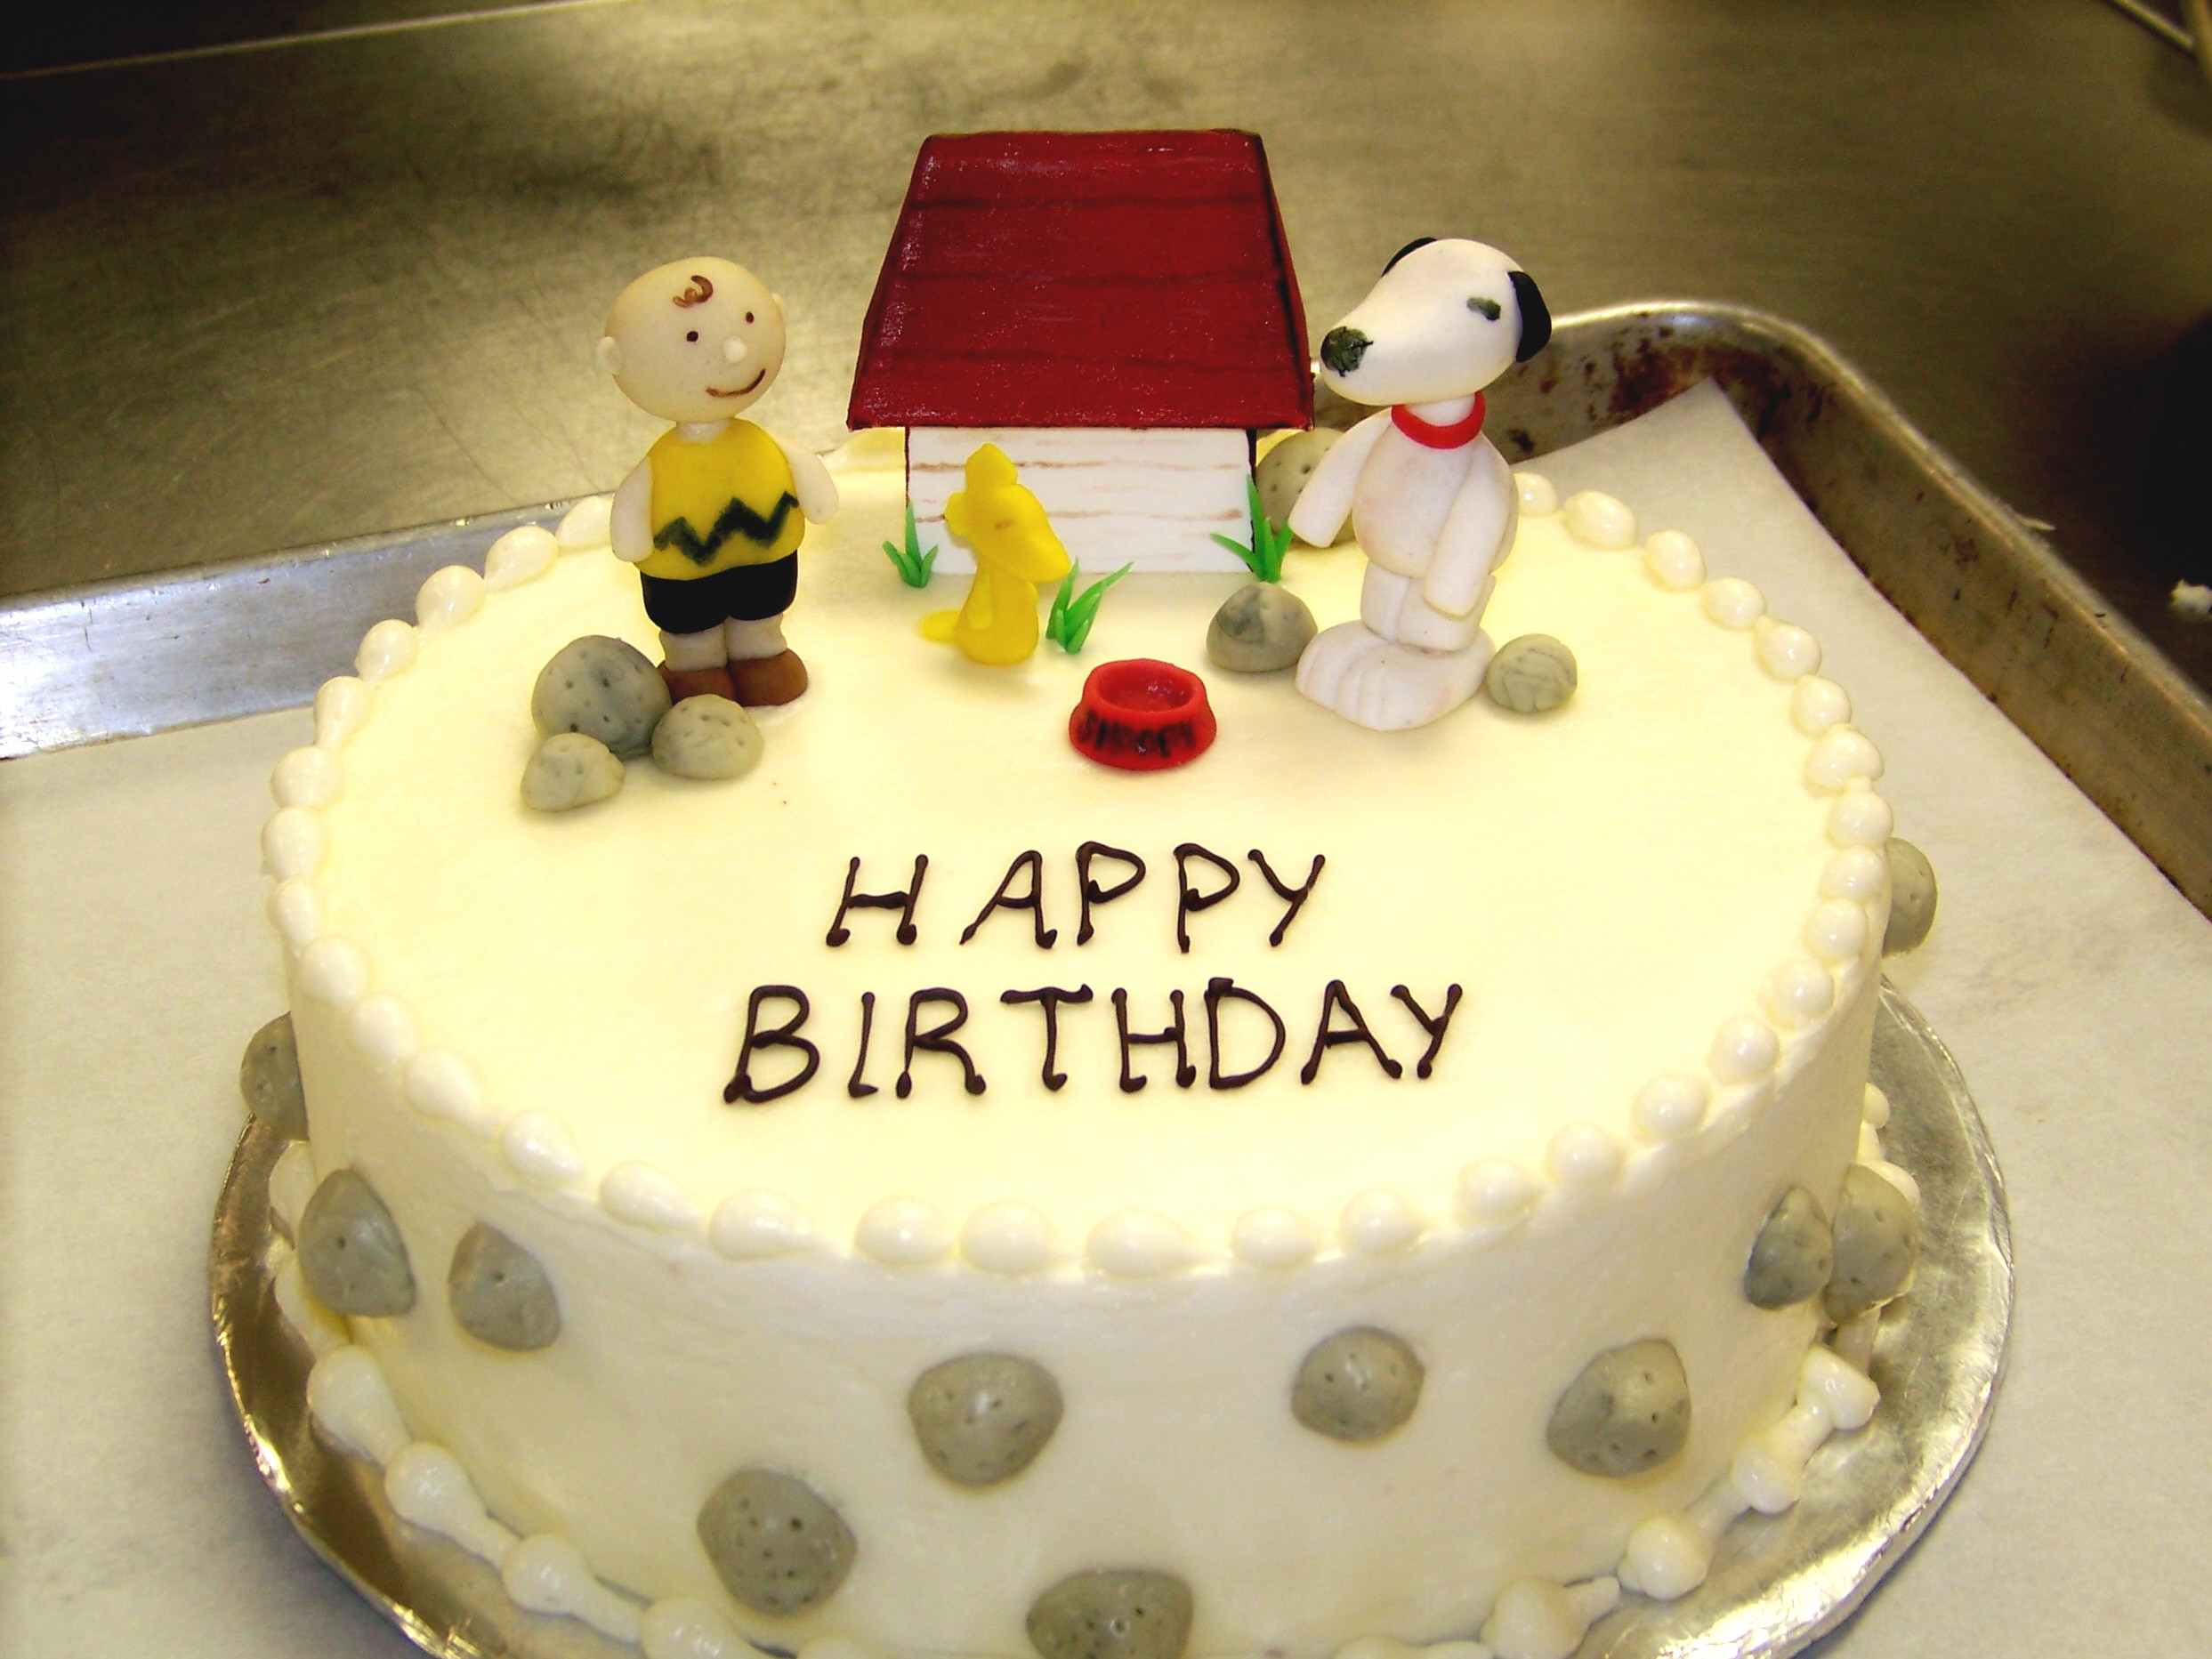 Birthday Cake Images Free Download
 Birthday Cake HD Wallpapers